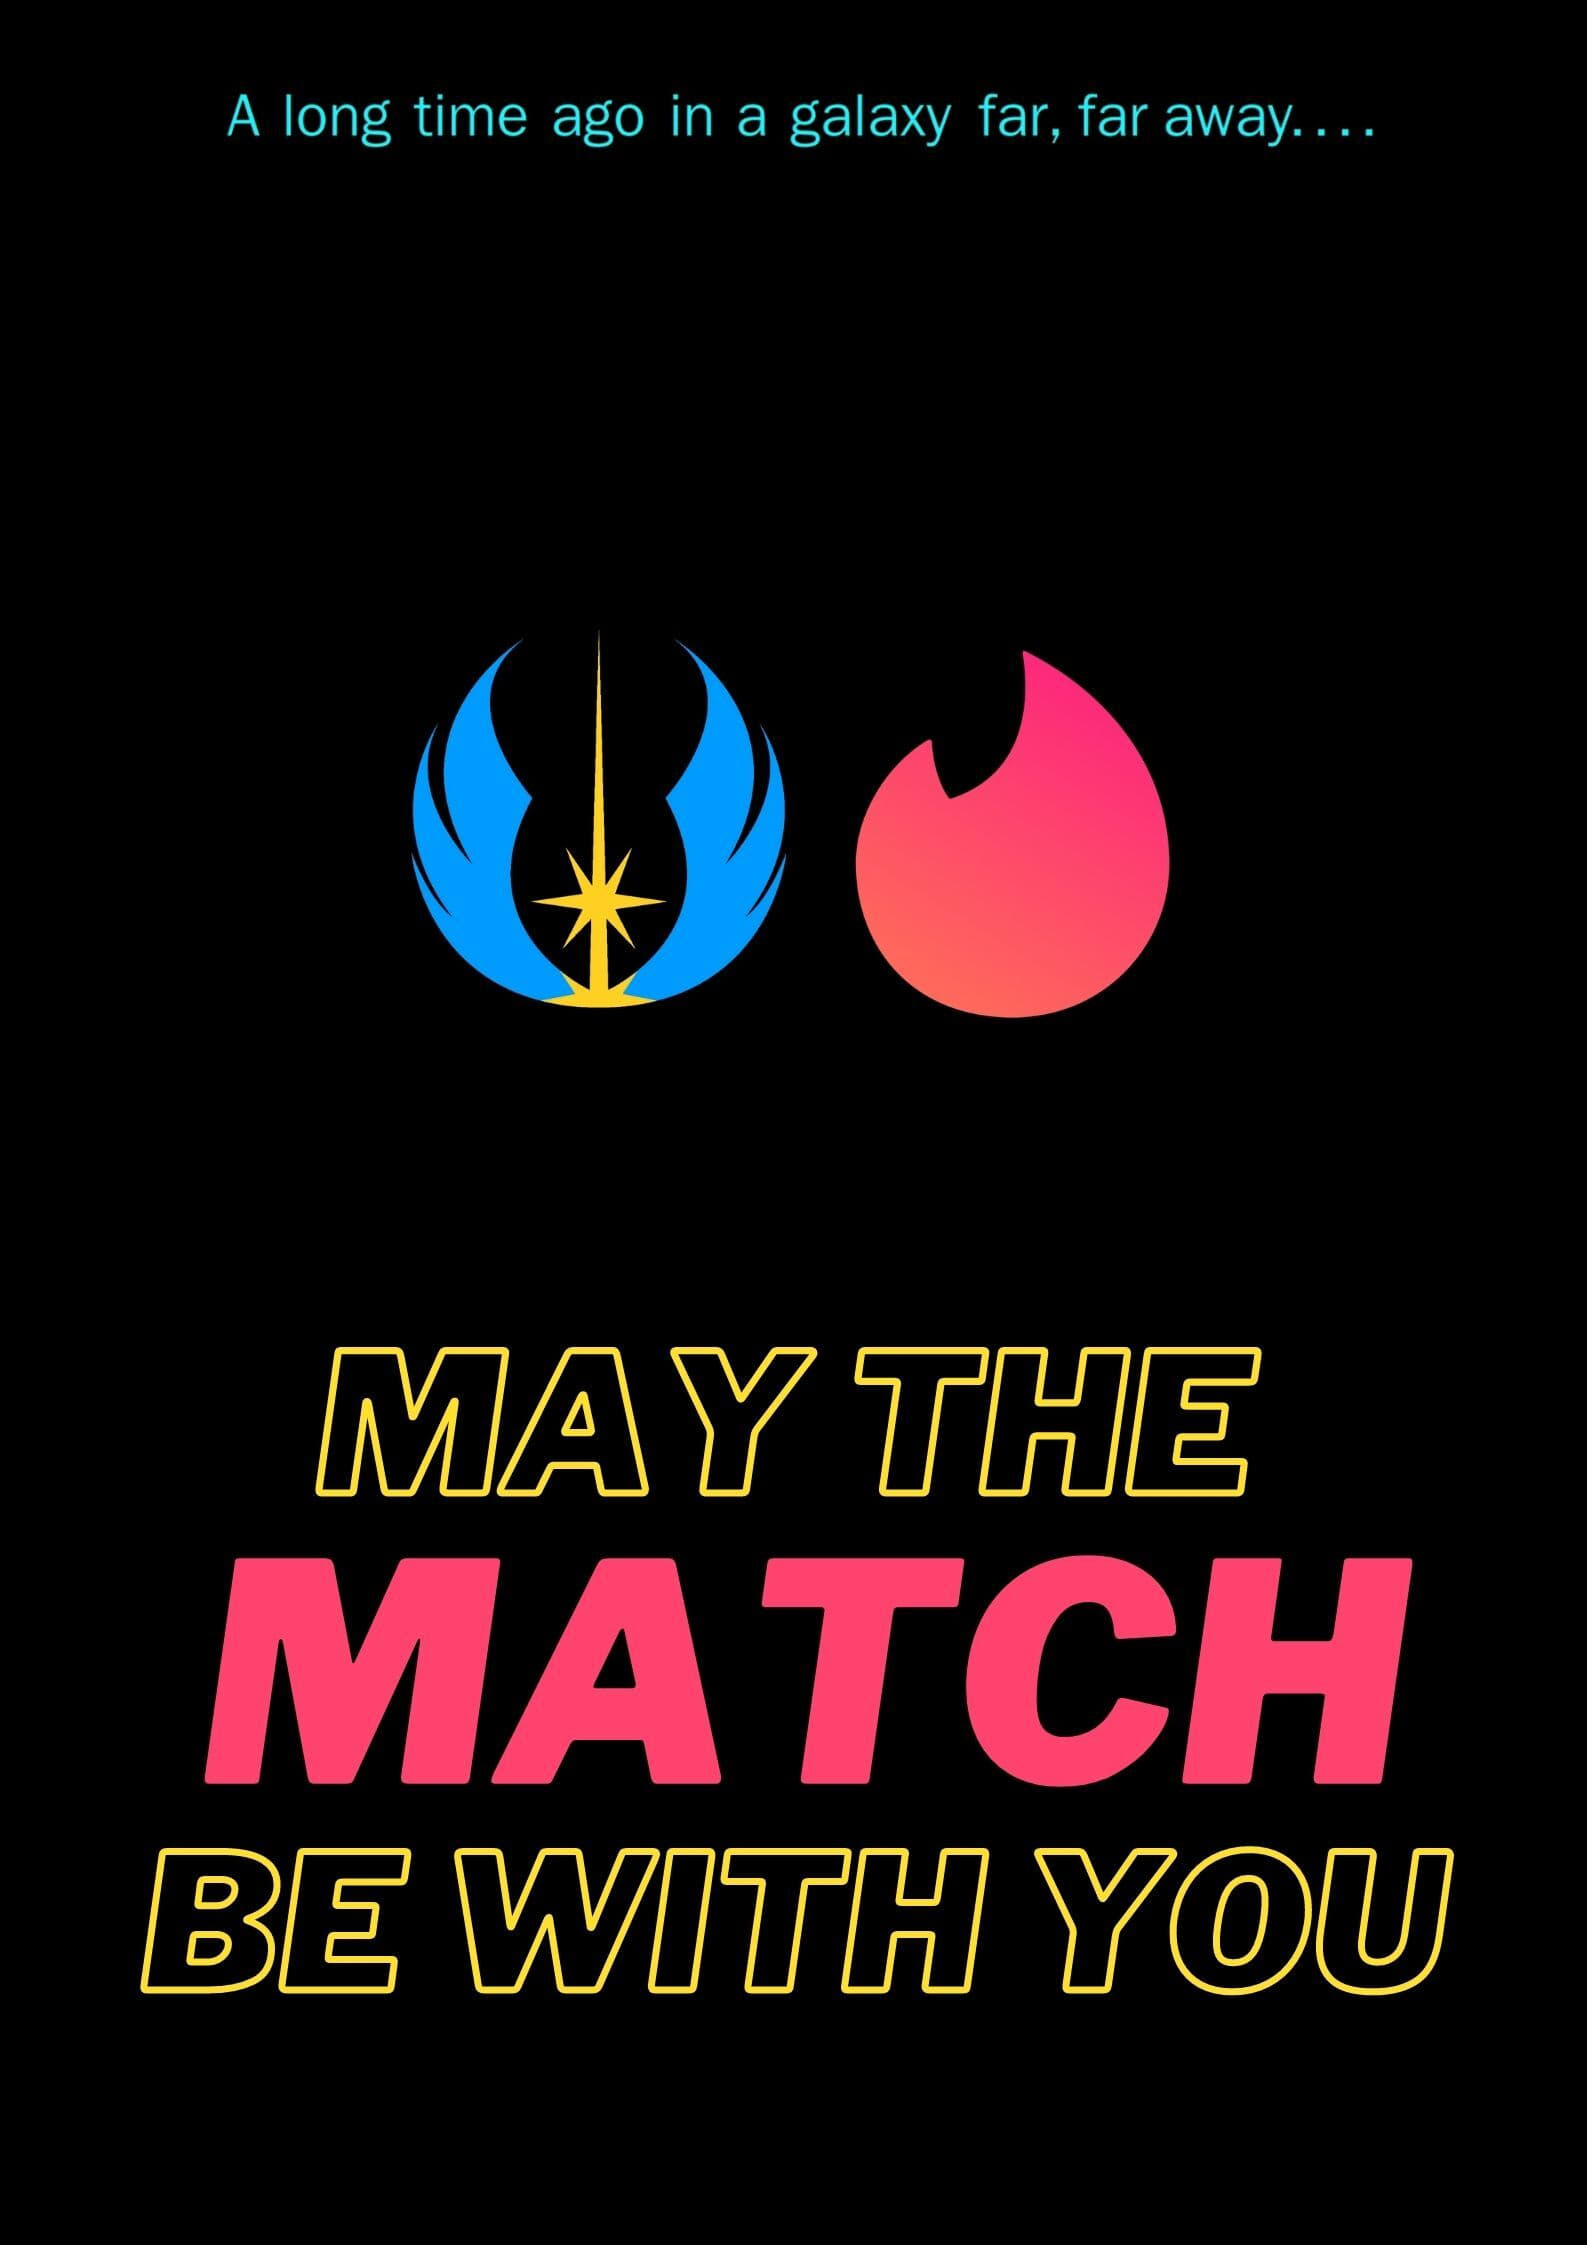 May the match be with you